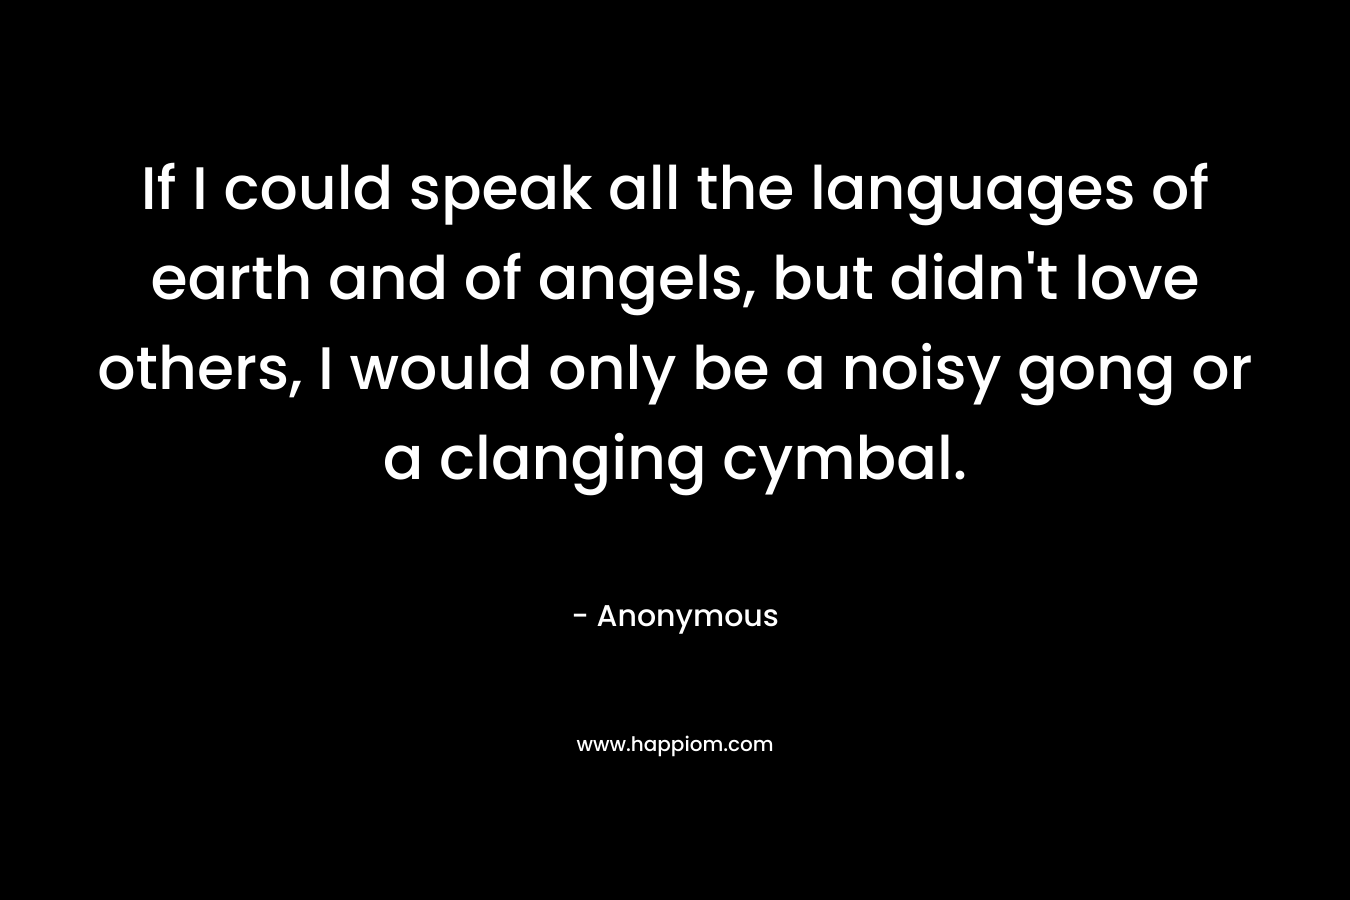 If I could speak all the languages of earth and of angels, but didn’t love others, I would only be a noisy gong or a clanging cymbal. – Anonymous